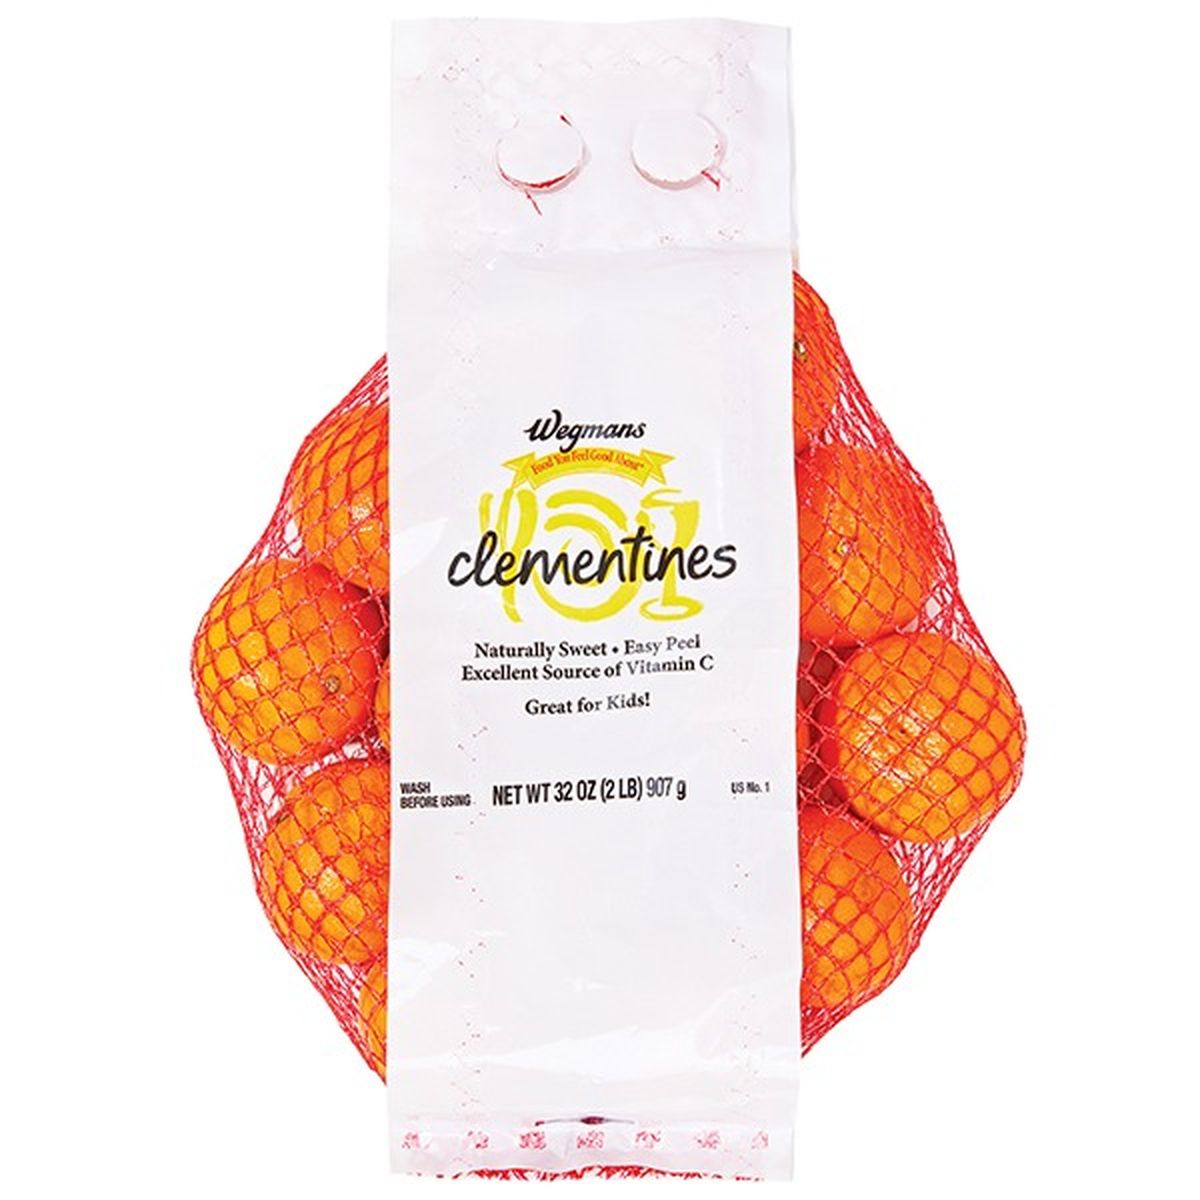 Calories in Wegmans Bagged Clementines